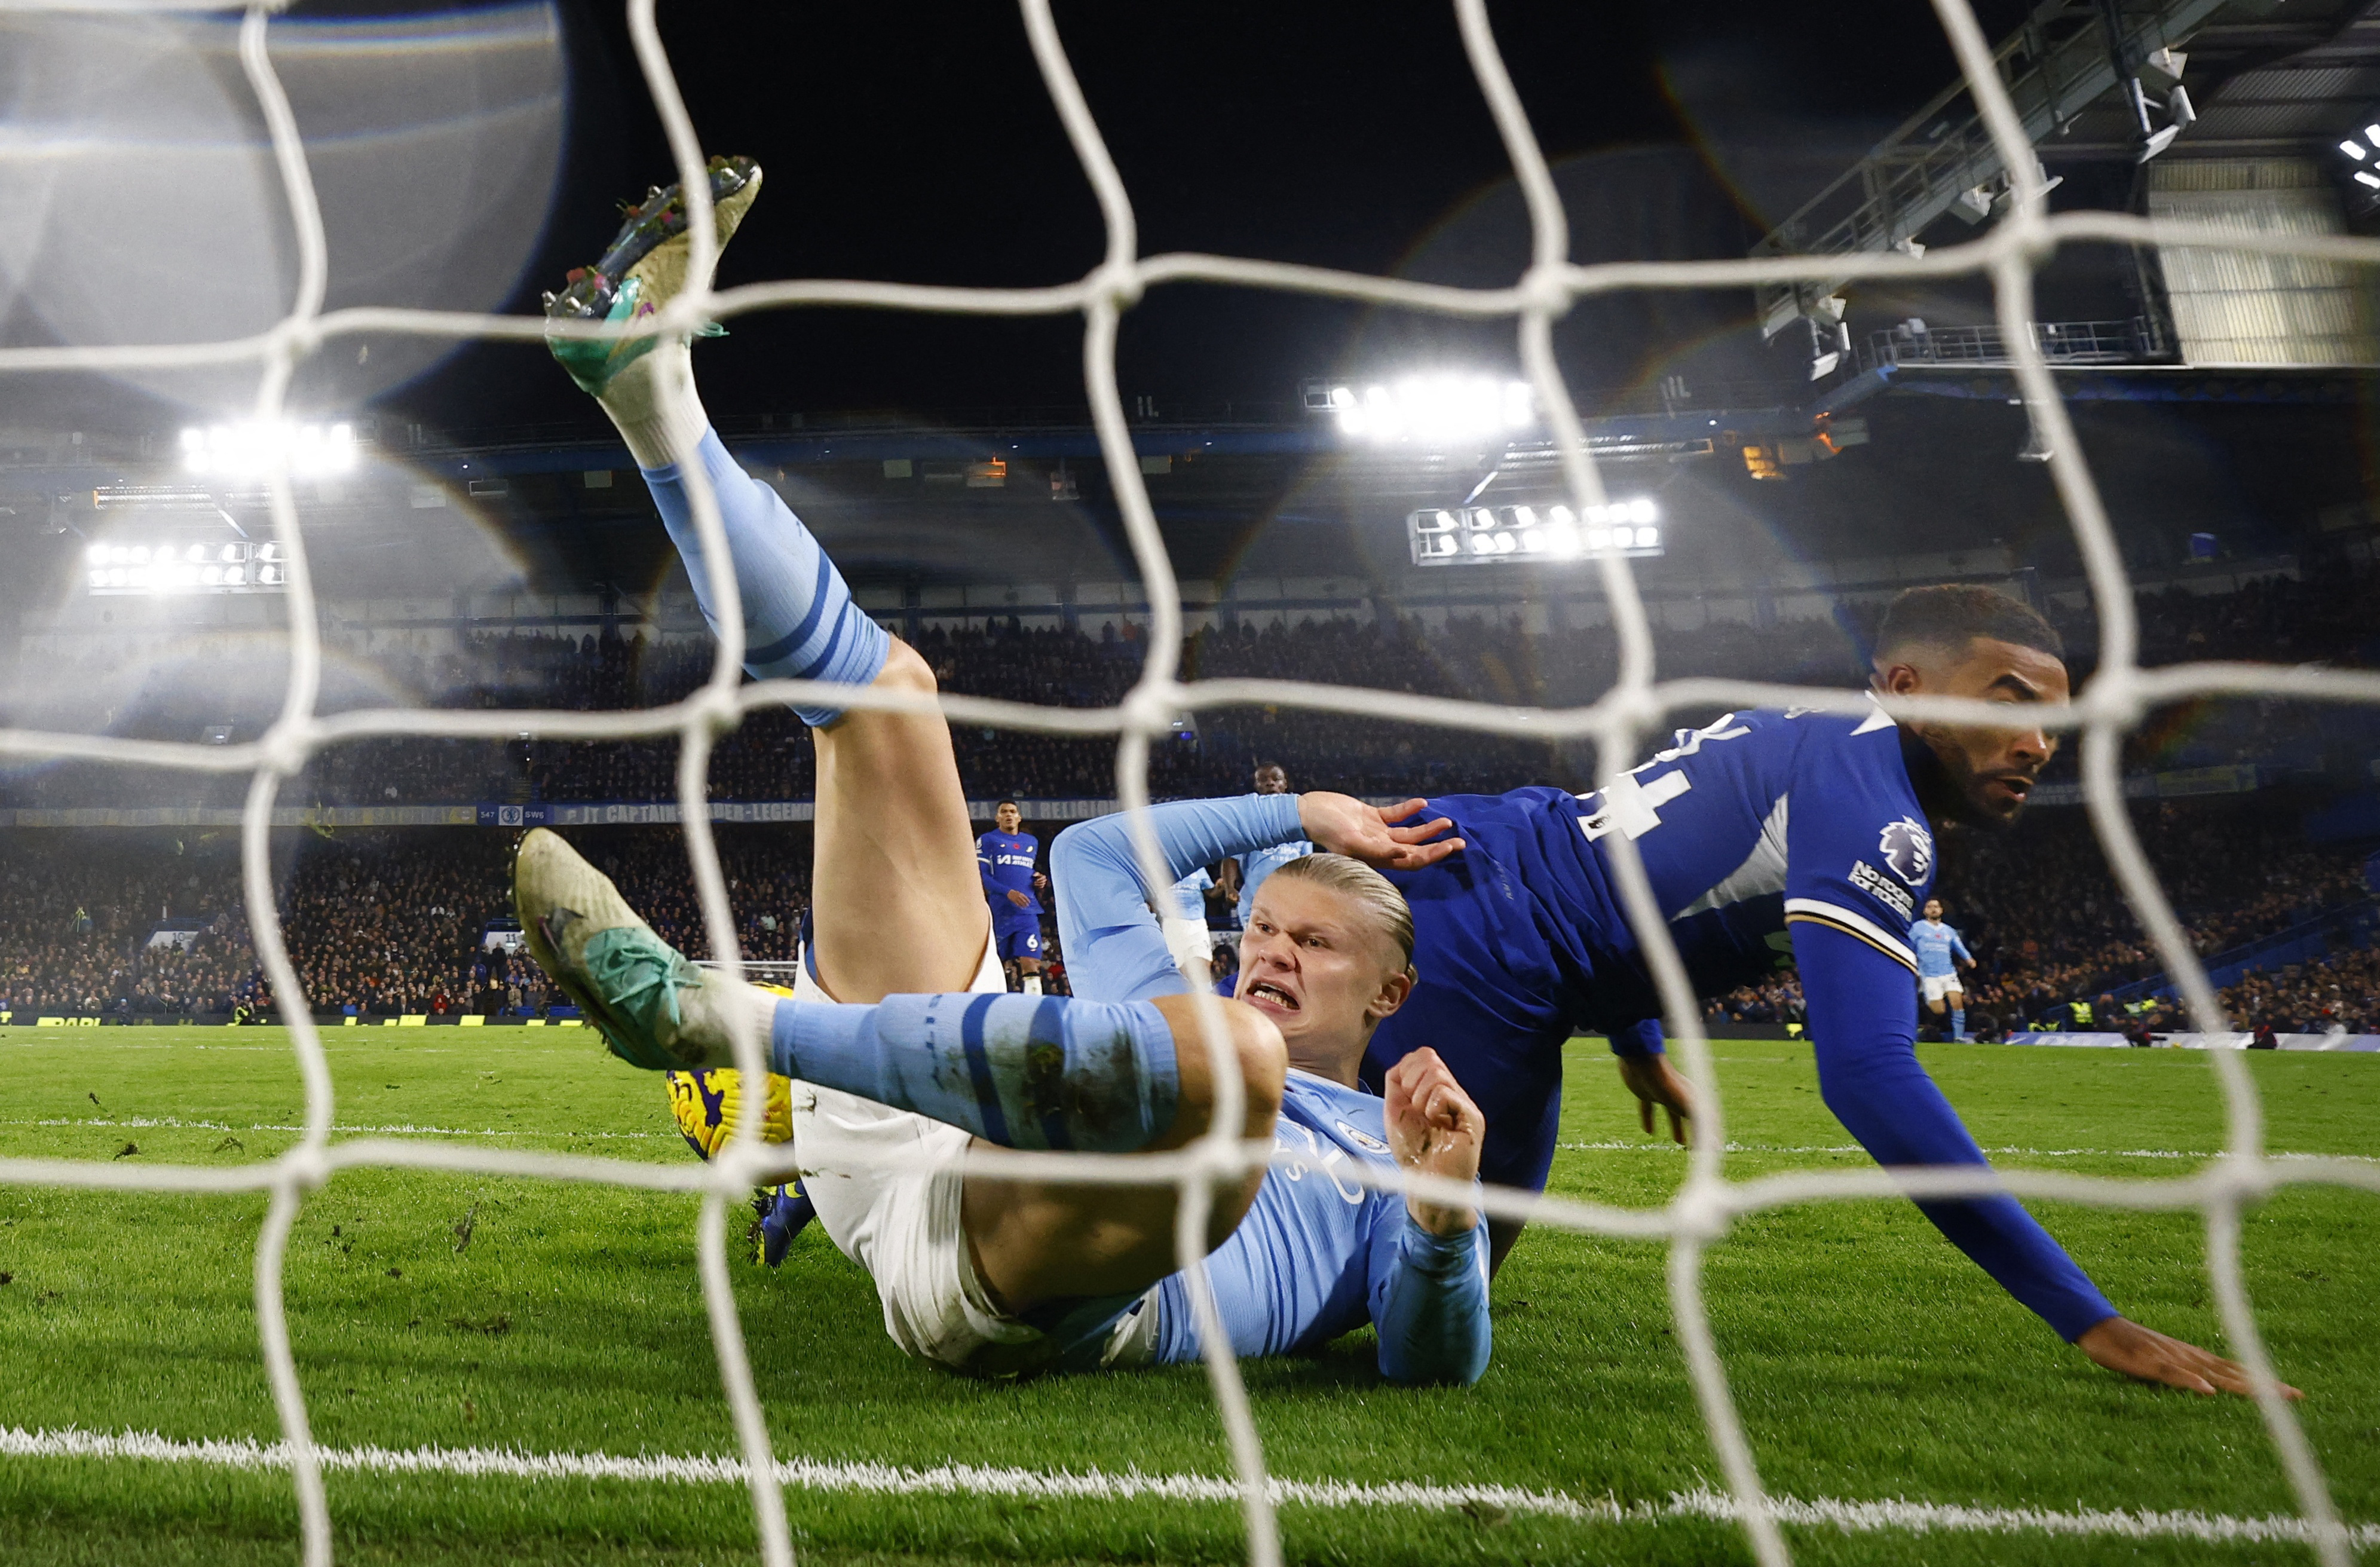 Man City move clear at the top after pulsating 4-4 draw at Chelsea | Reuters